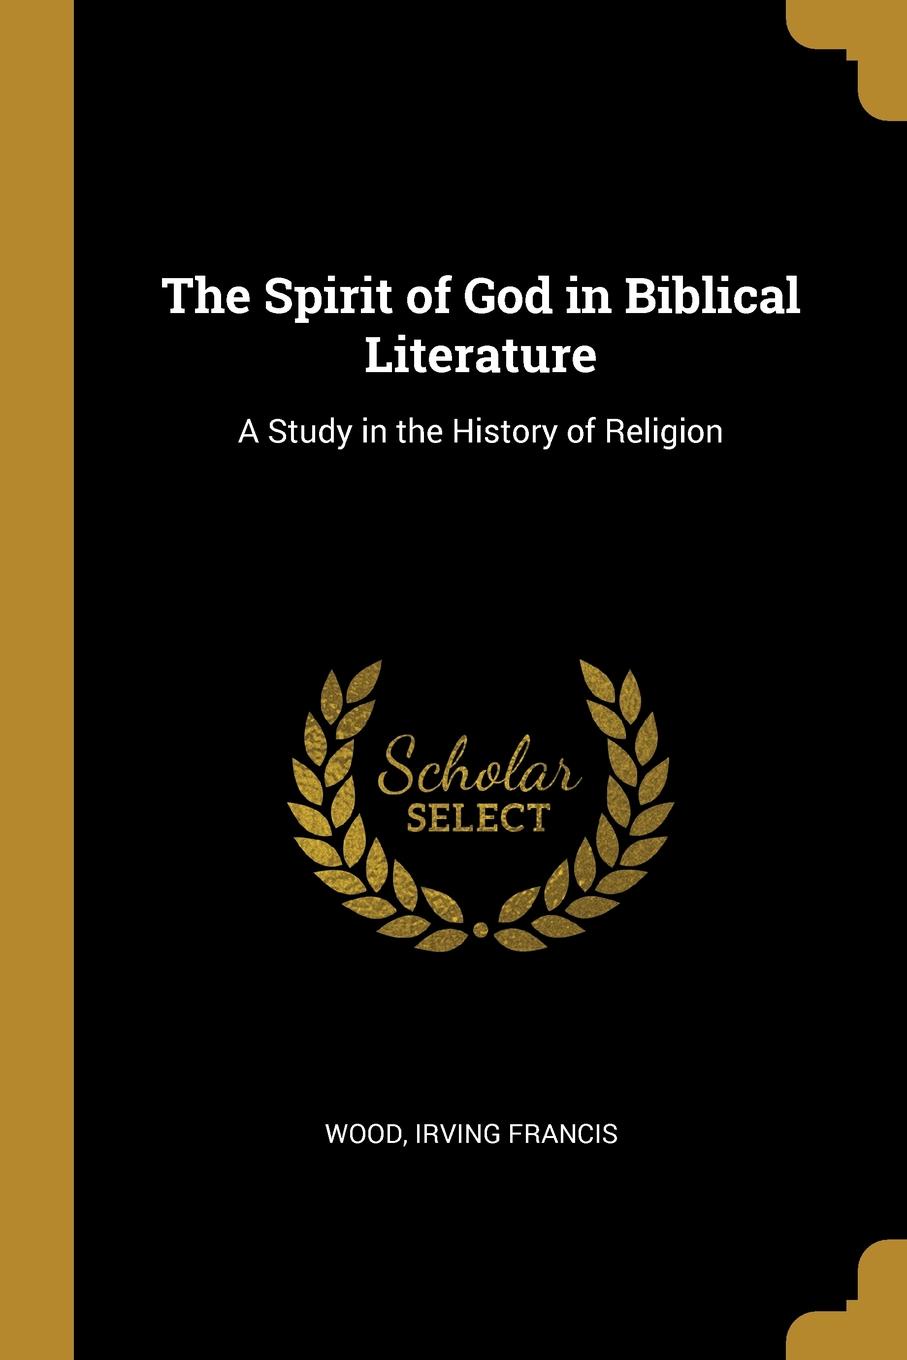 The Spirit of God in Biblical Literature. A Study in the History of Religion